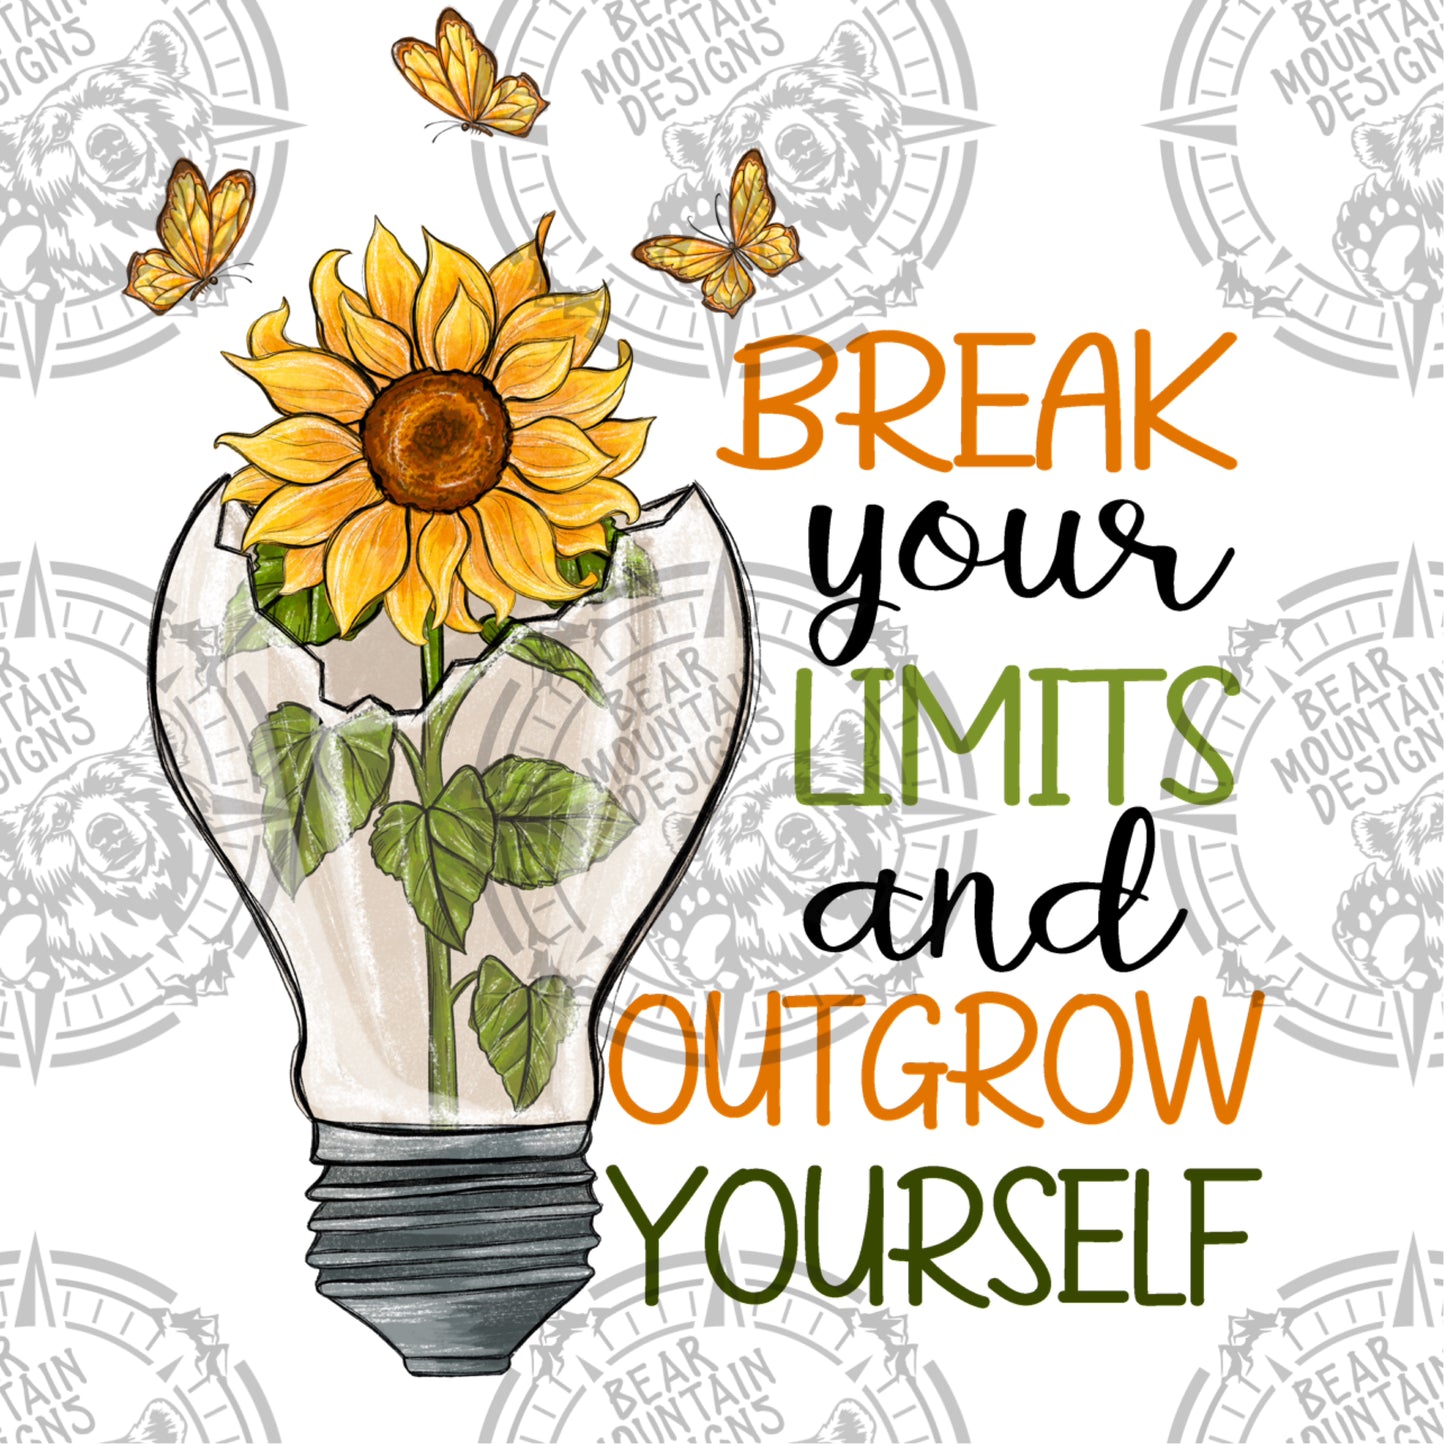 Break Your Limits And Outgrow Yourself